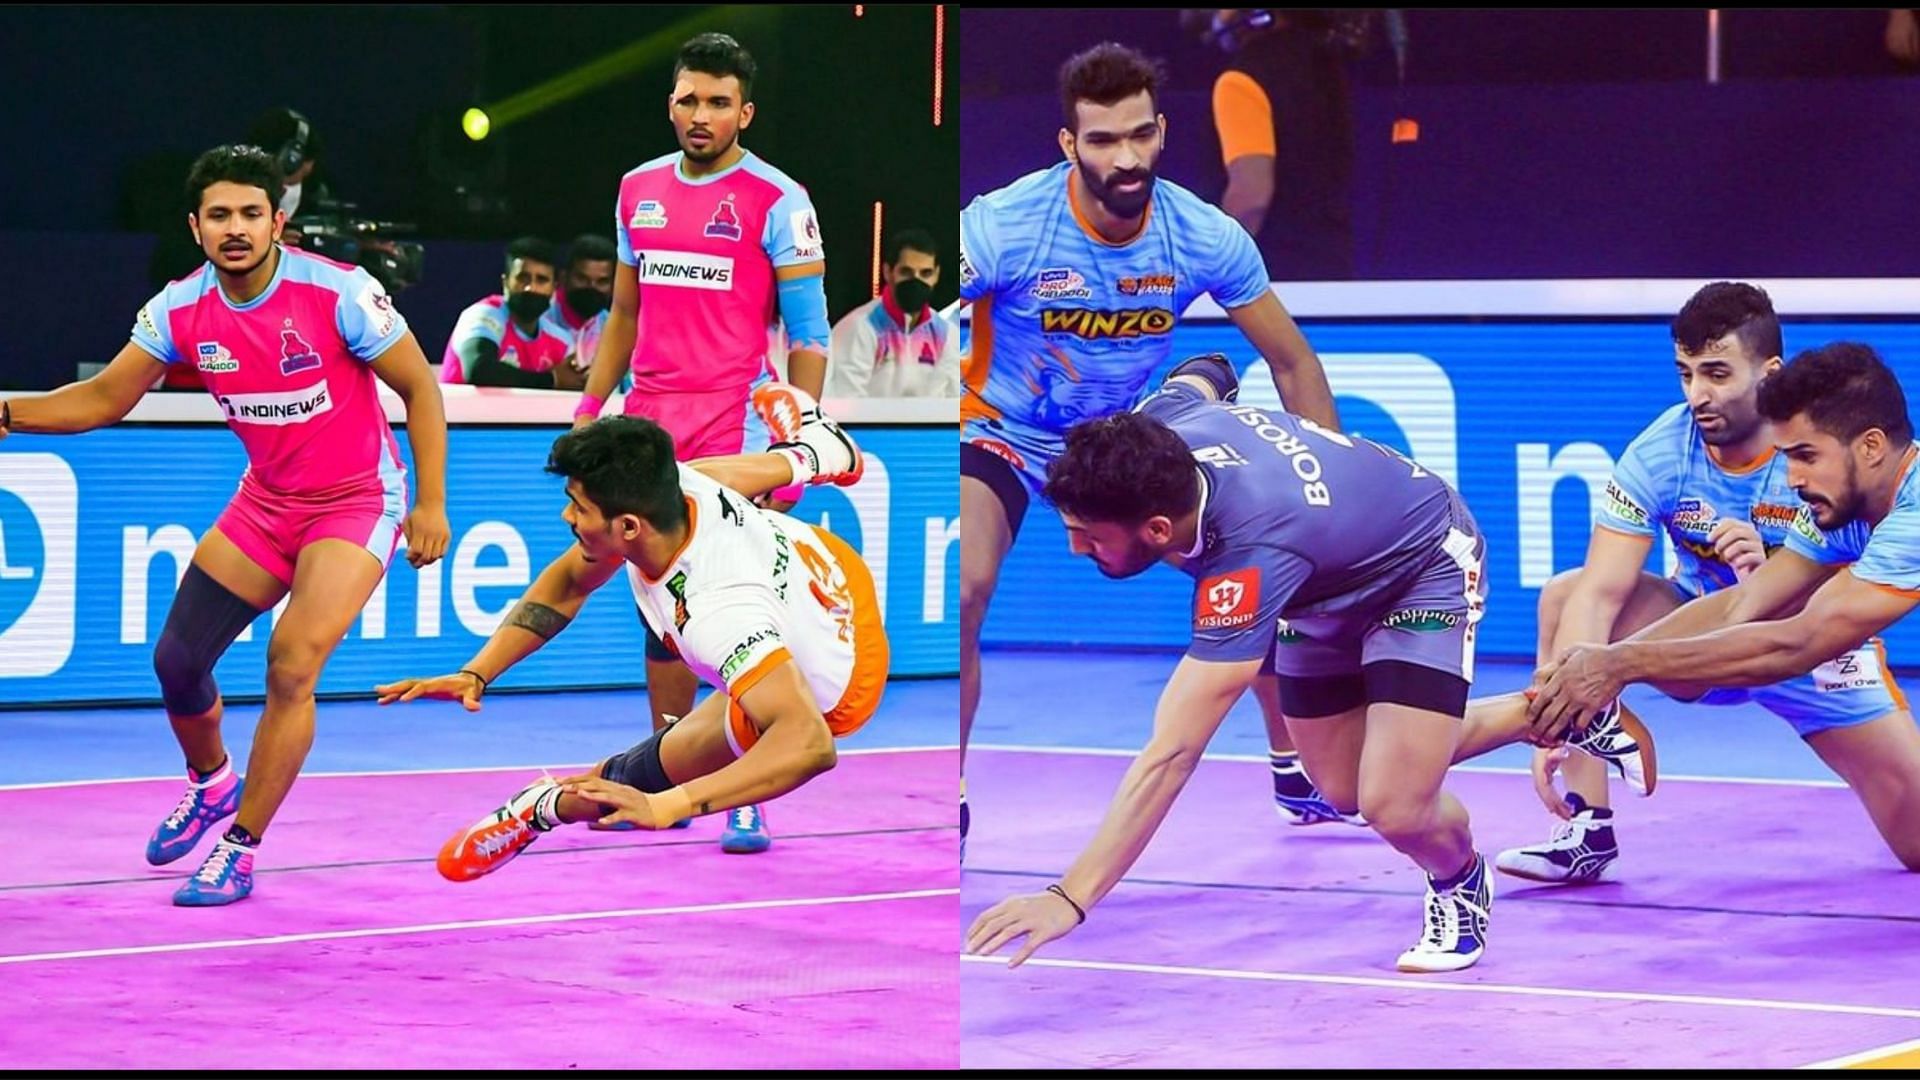 Two matches took place in PKL 8 on January 7, 2022 (Image: Pro Kabaddi/Instagram)